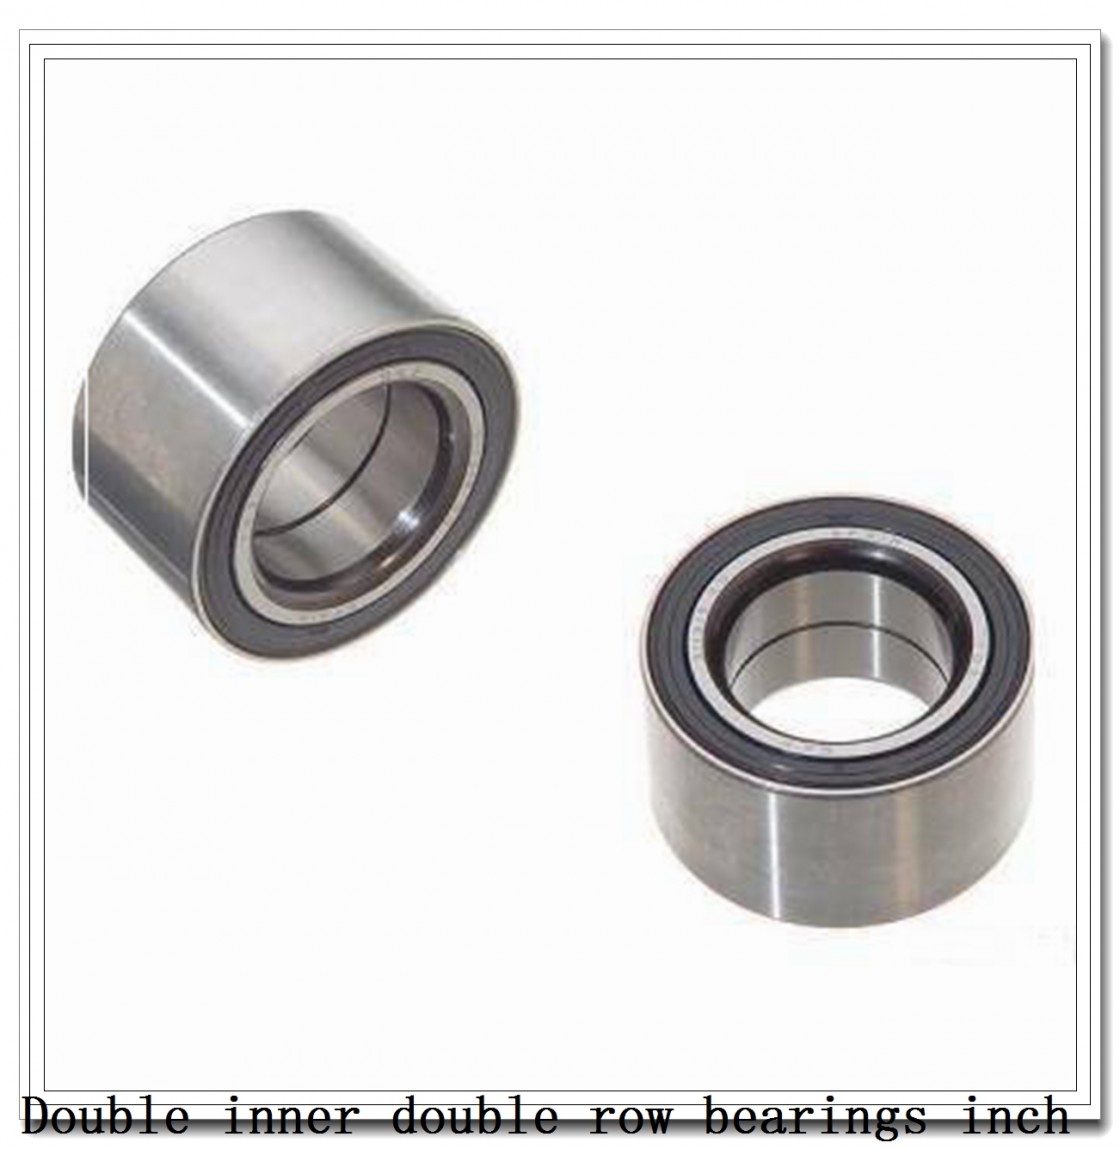 96925/96140D Double inner double row bearings inch